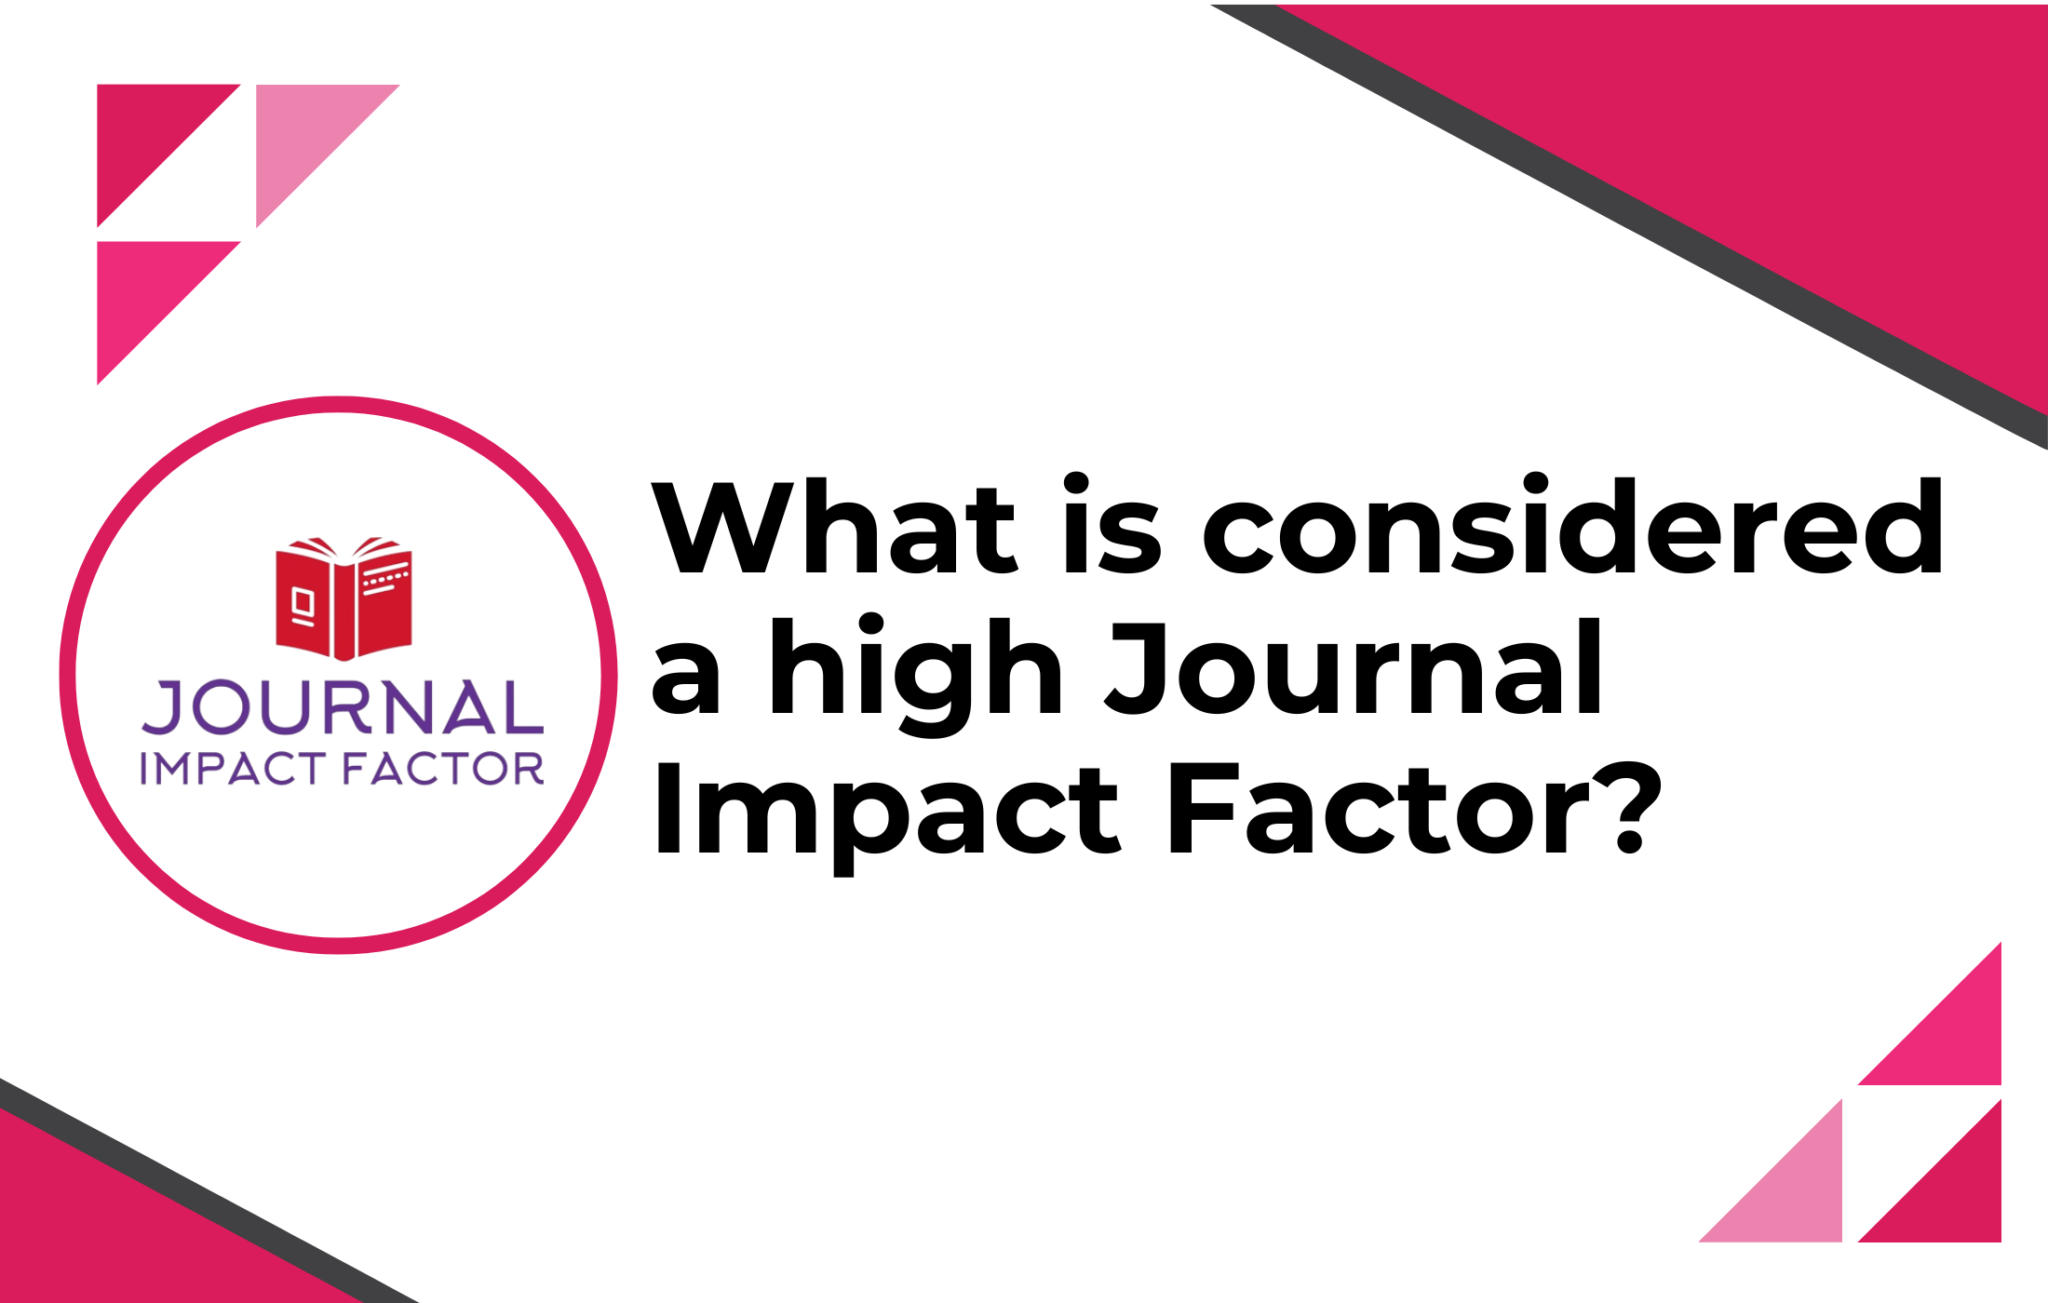 (Latest) Nature Microbiology Impact Factor 2023 Journal Impact Factor